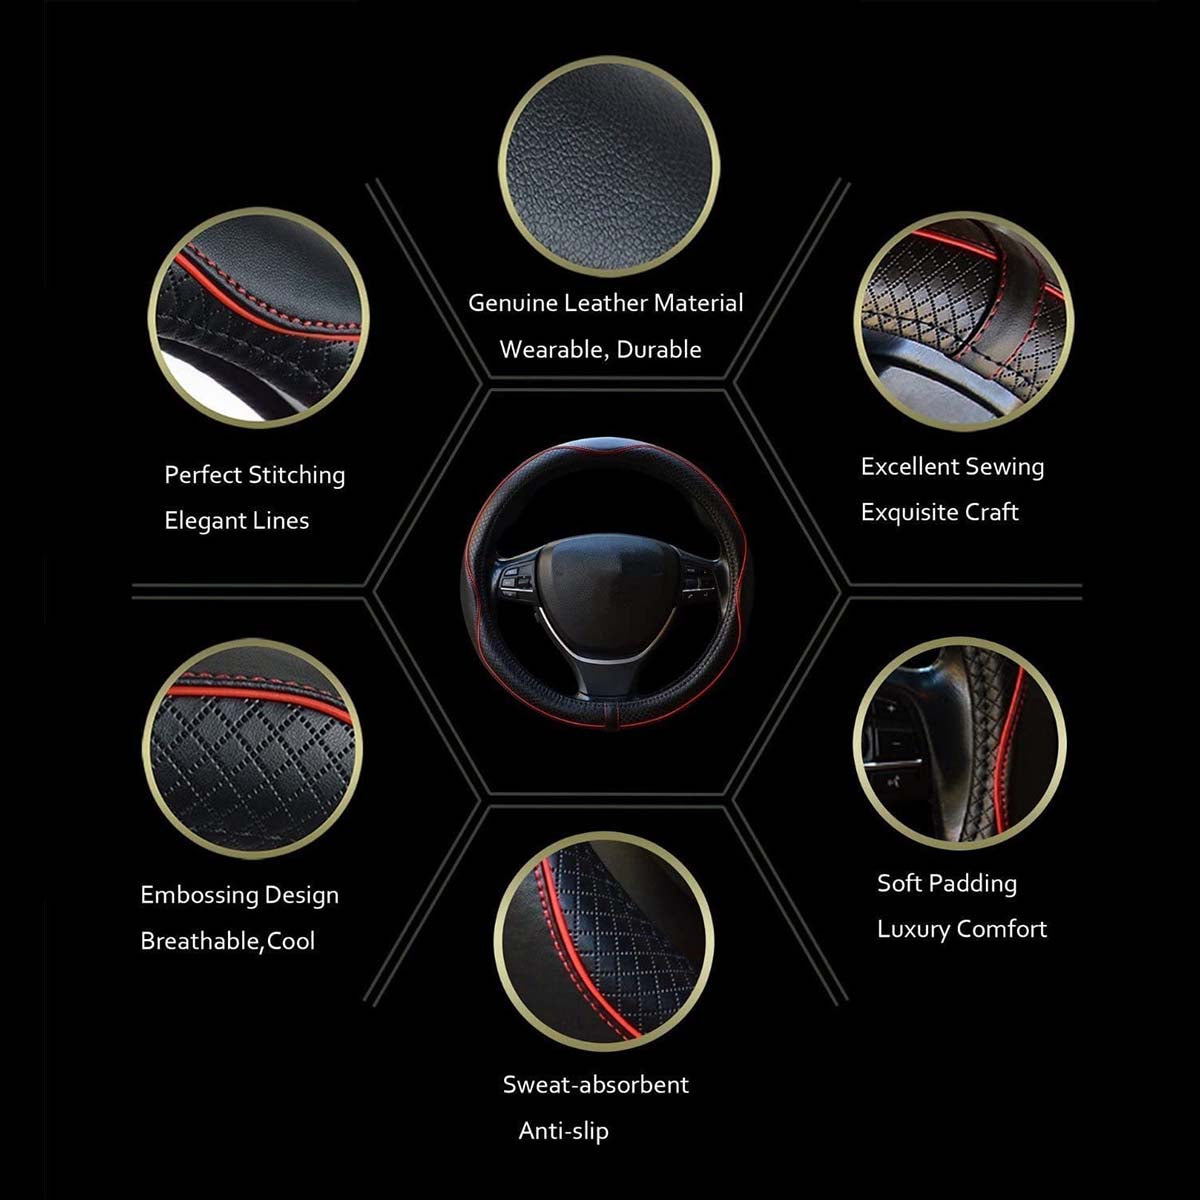 Car Steering Wheel Cover, Custom For Your Cars, Anti-Slip, Safety, Soft, Breathable, Heavy Duty, Thick, Full Surround, Sports Style, Car Accessories FJ18990